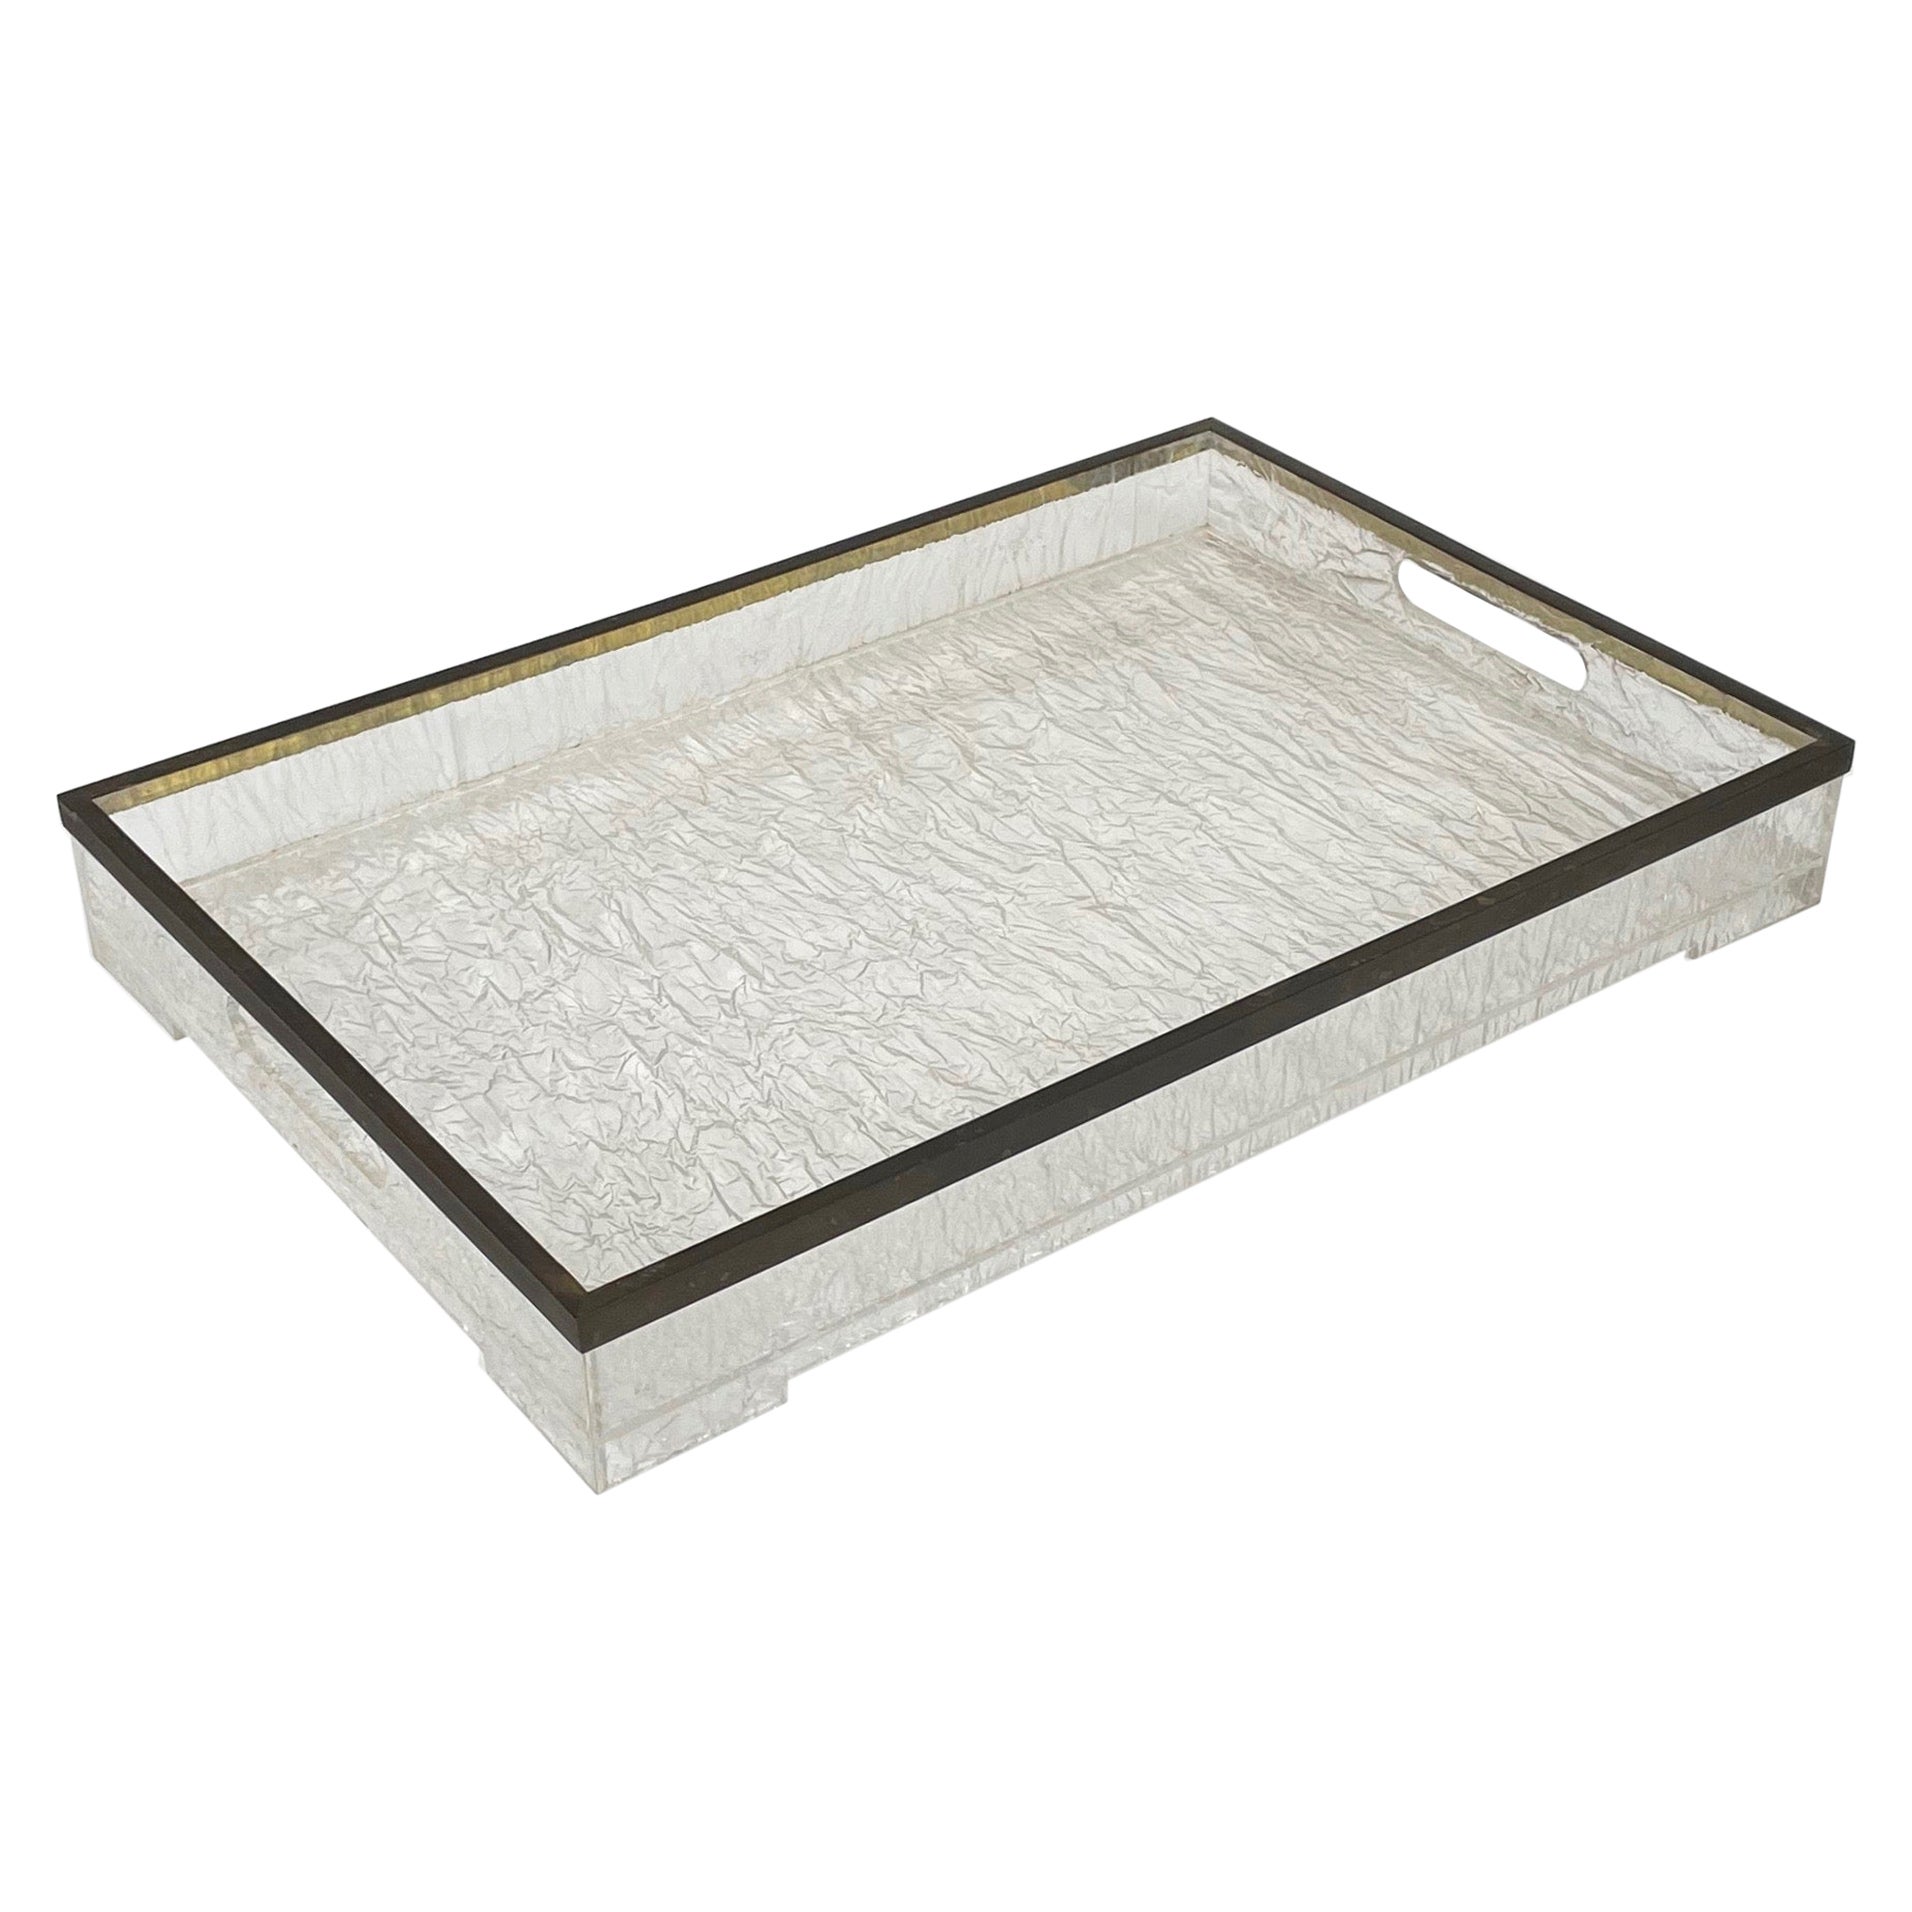 Willy Rizzo Style Serving Tray in Ice Effect Lucite and Brass, Italy, 1970s For Sale